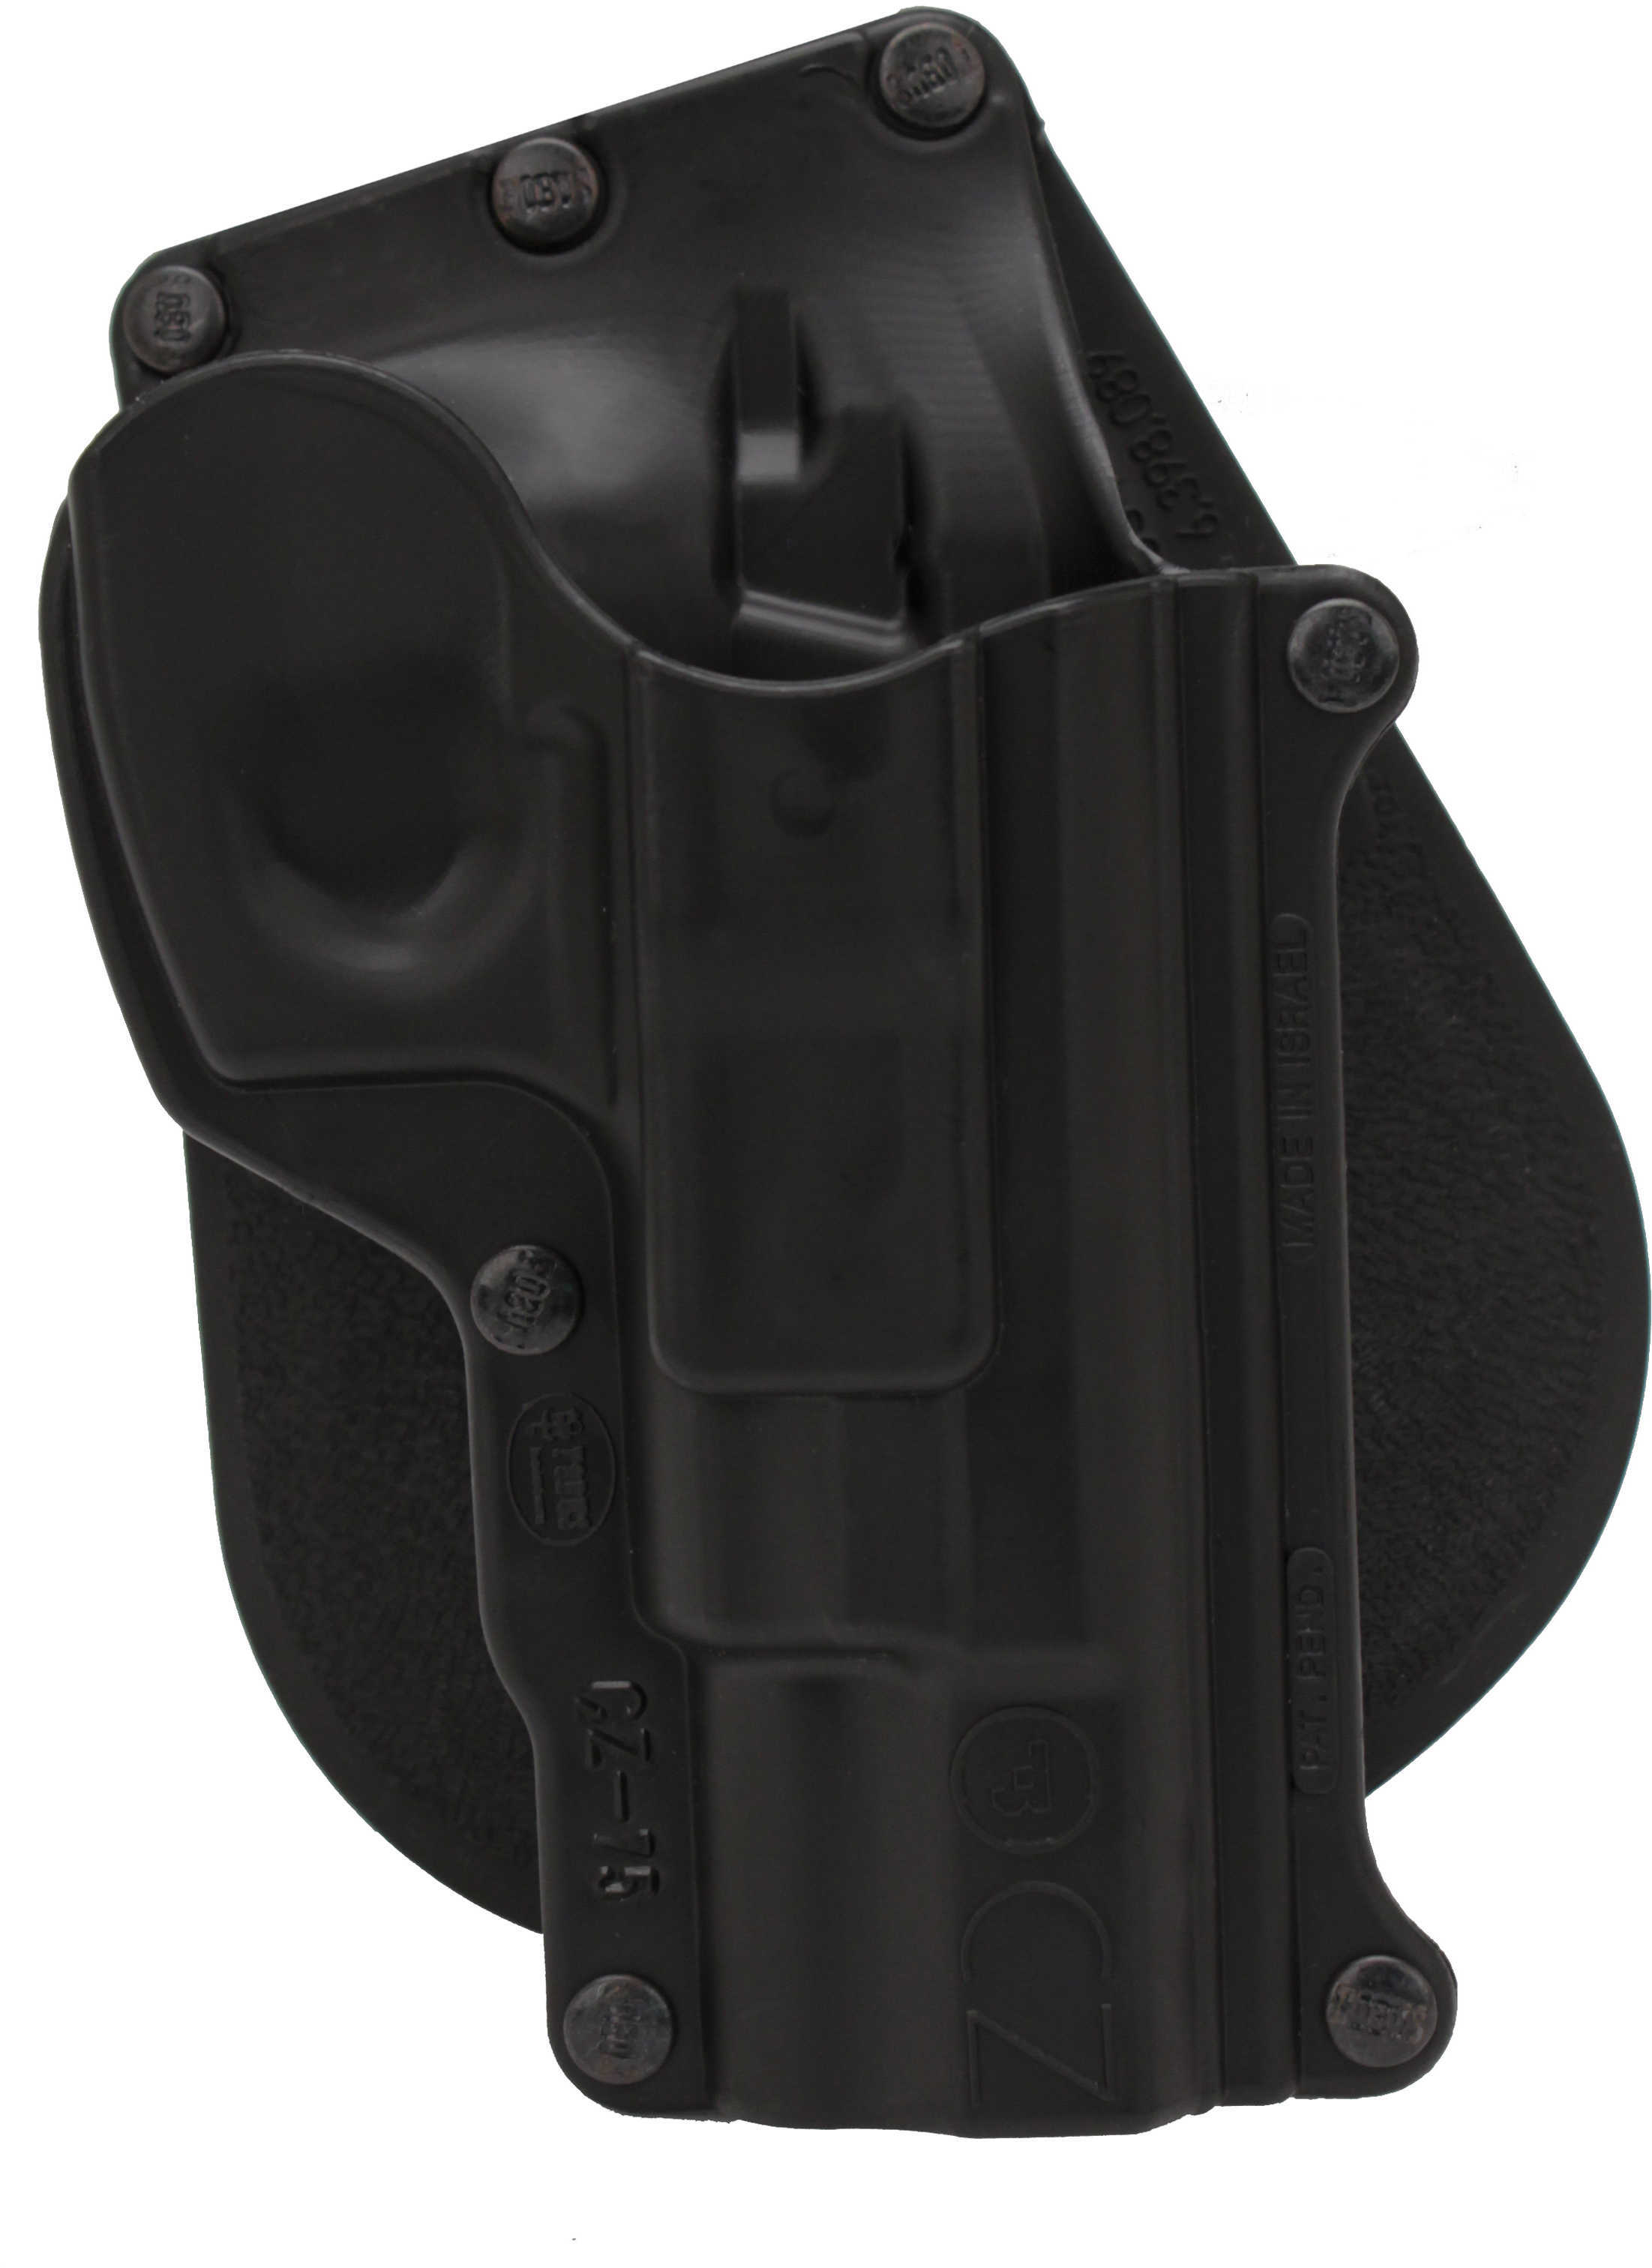 Fobus Holster CZ 75,75BD,75D Compact Right Hand Paddle Attachment Polymer Black